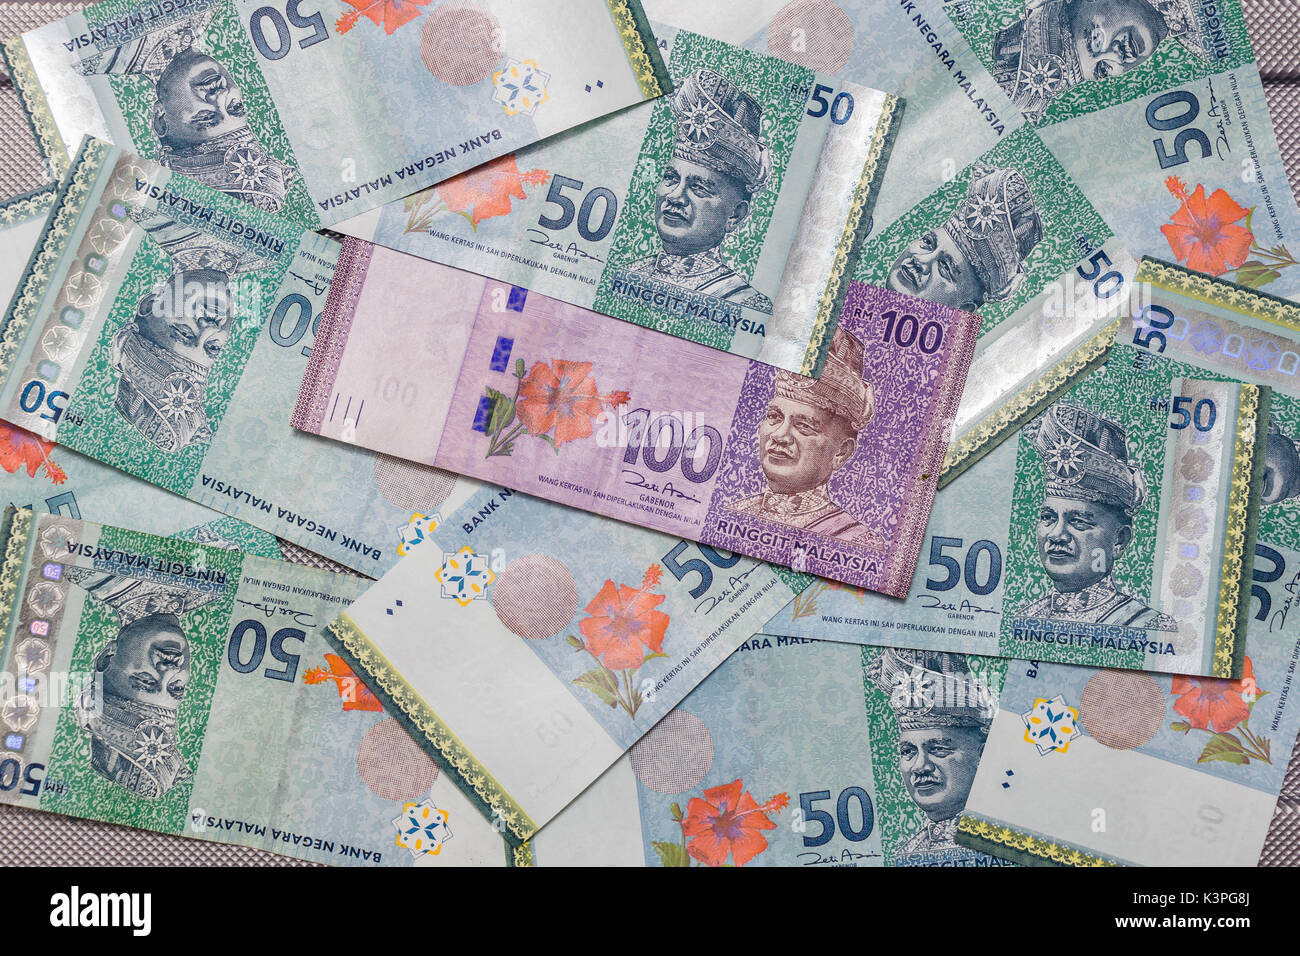 Malaysian Ringgit currency on pattern background, symbol RM currency